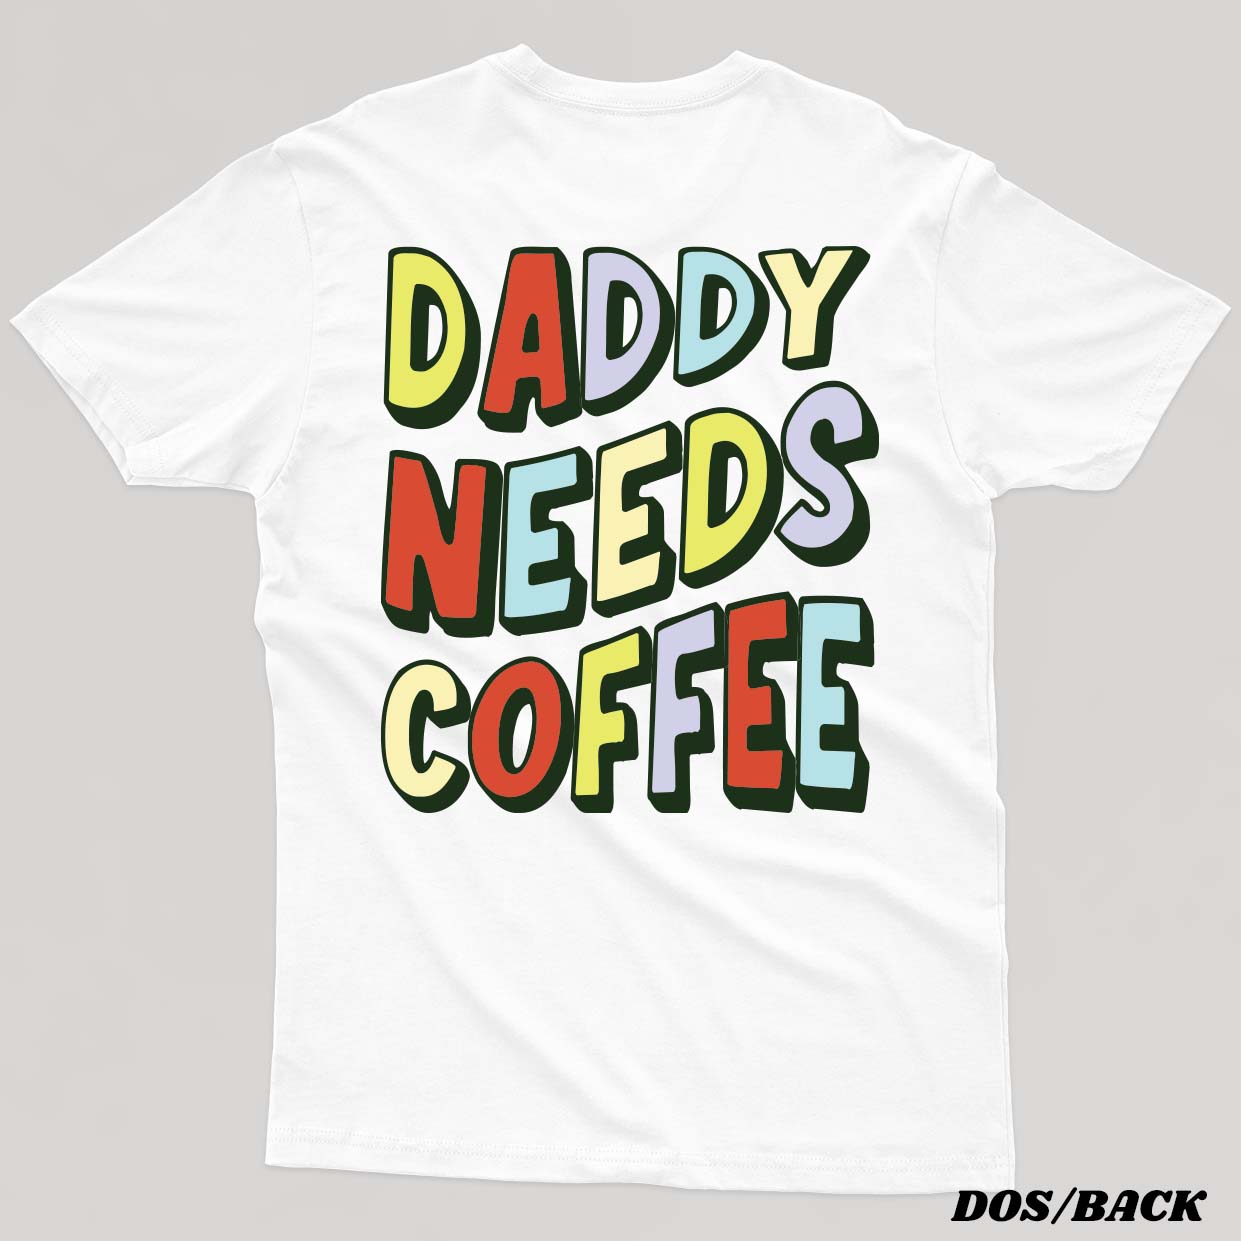 DADDY NEEDS COFFEE t-shirt unisexe - tamelo boutique